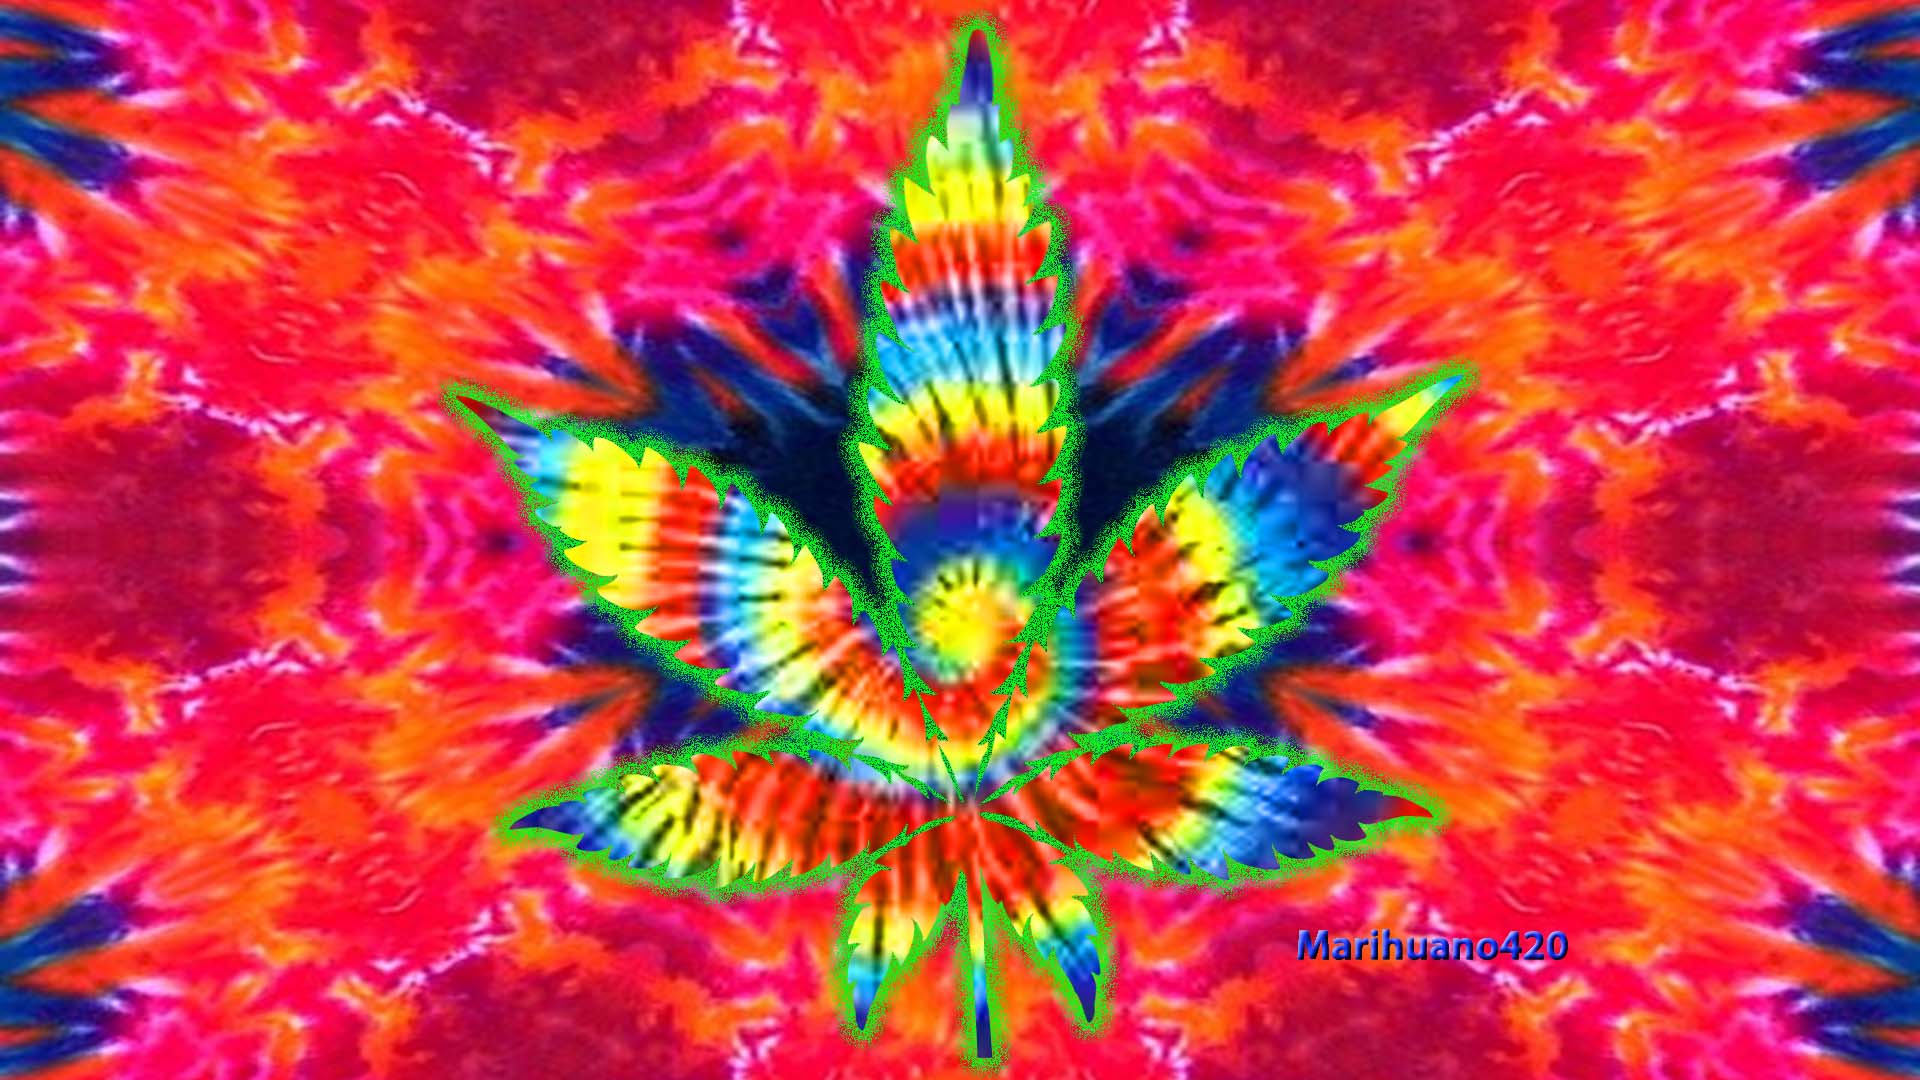 Trippy Weed Backgrounds Tumblr Hippie wallpaper weed 1920x1080